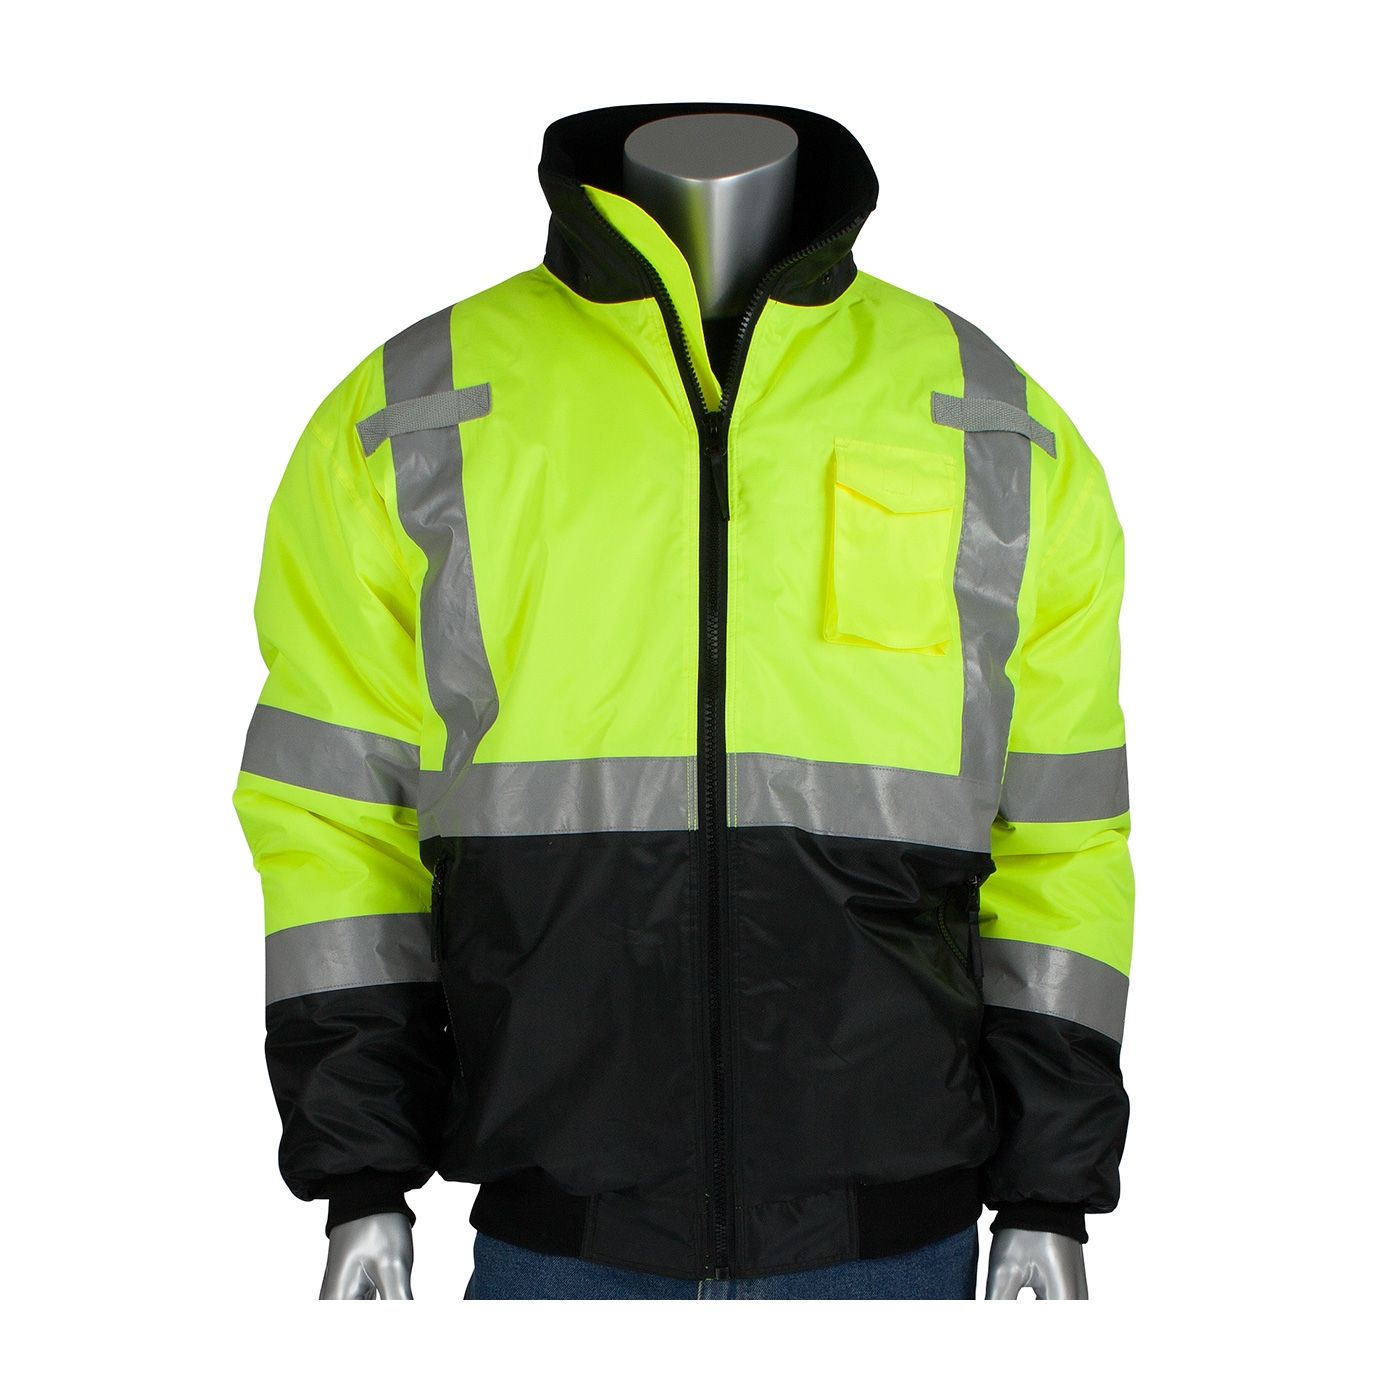 PIP 333-1740-LY Bomber Jacket with Quilted Liner, Class 3, Hi-Vis Yellow, 1 Each